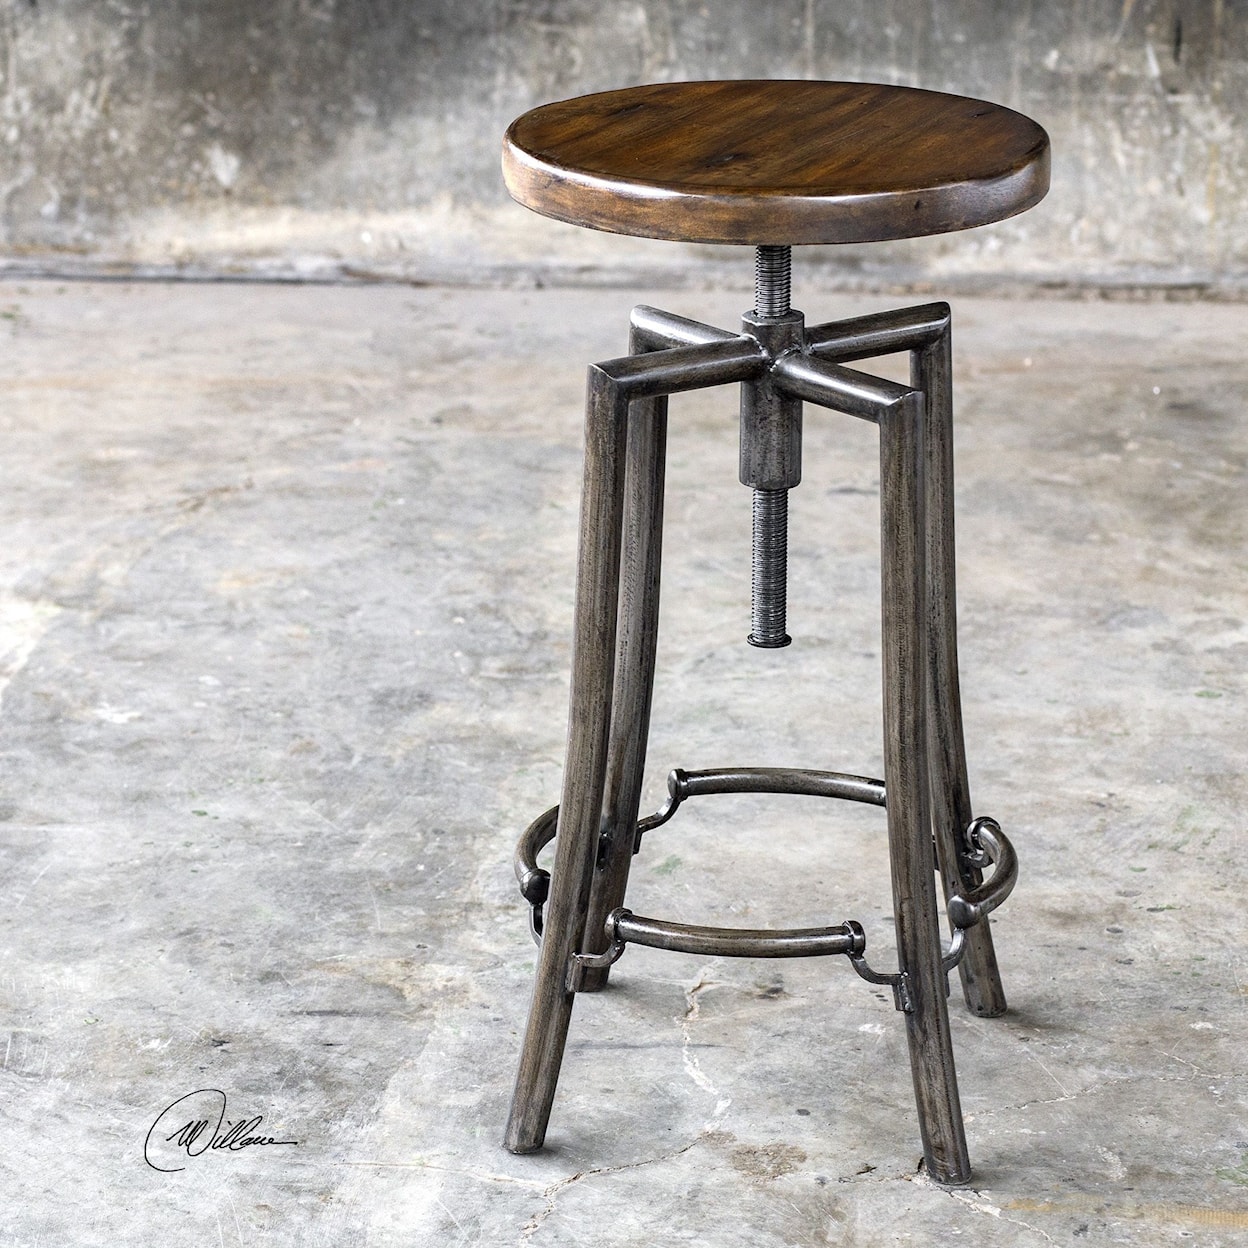 Uttermost Accent Furniture - Stools Westlyn Industrial Bar Stool